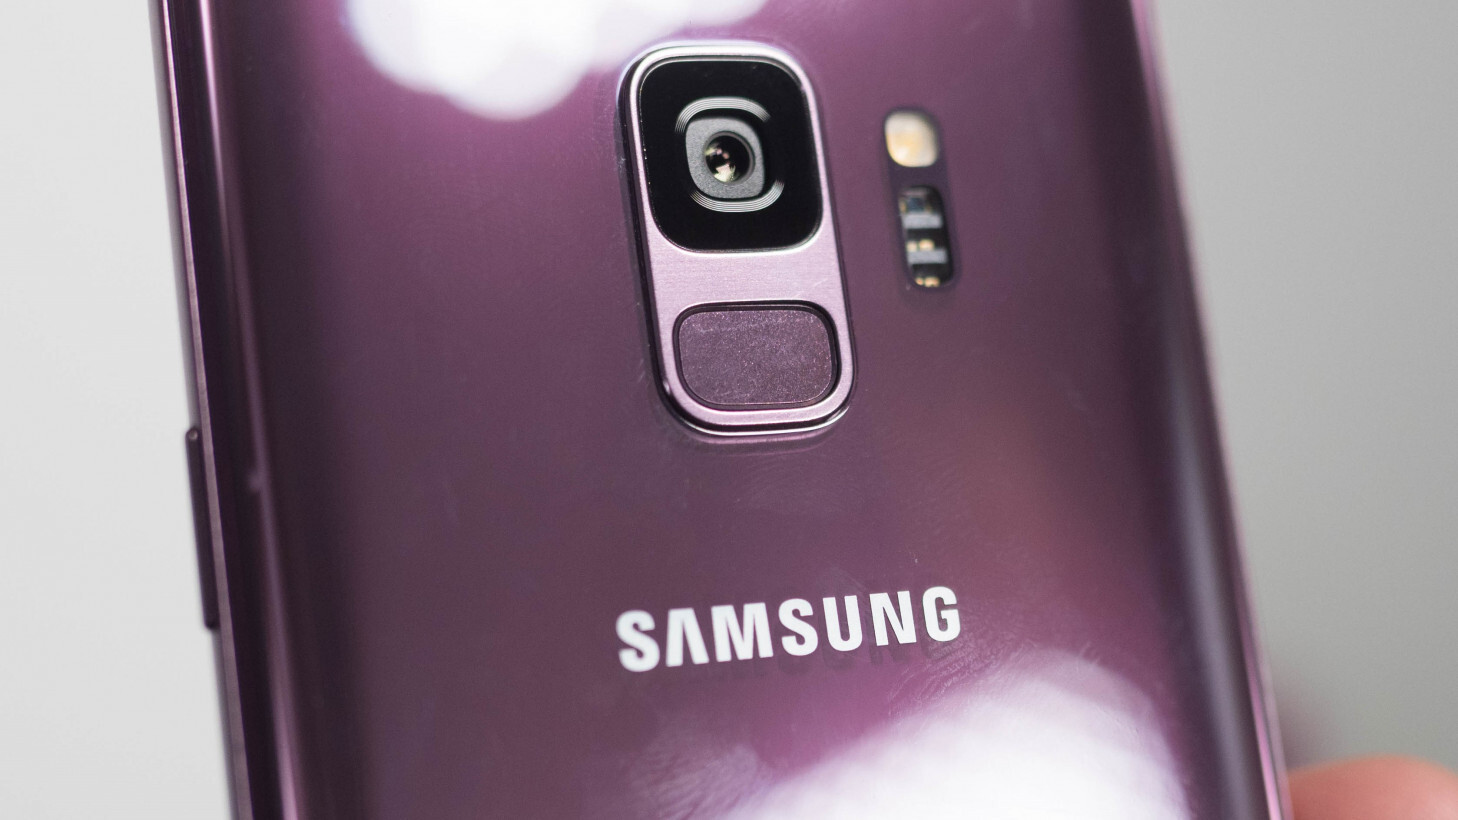 Samsung Galaxy S9: Our first photos with the new camera